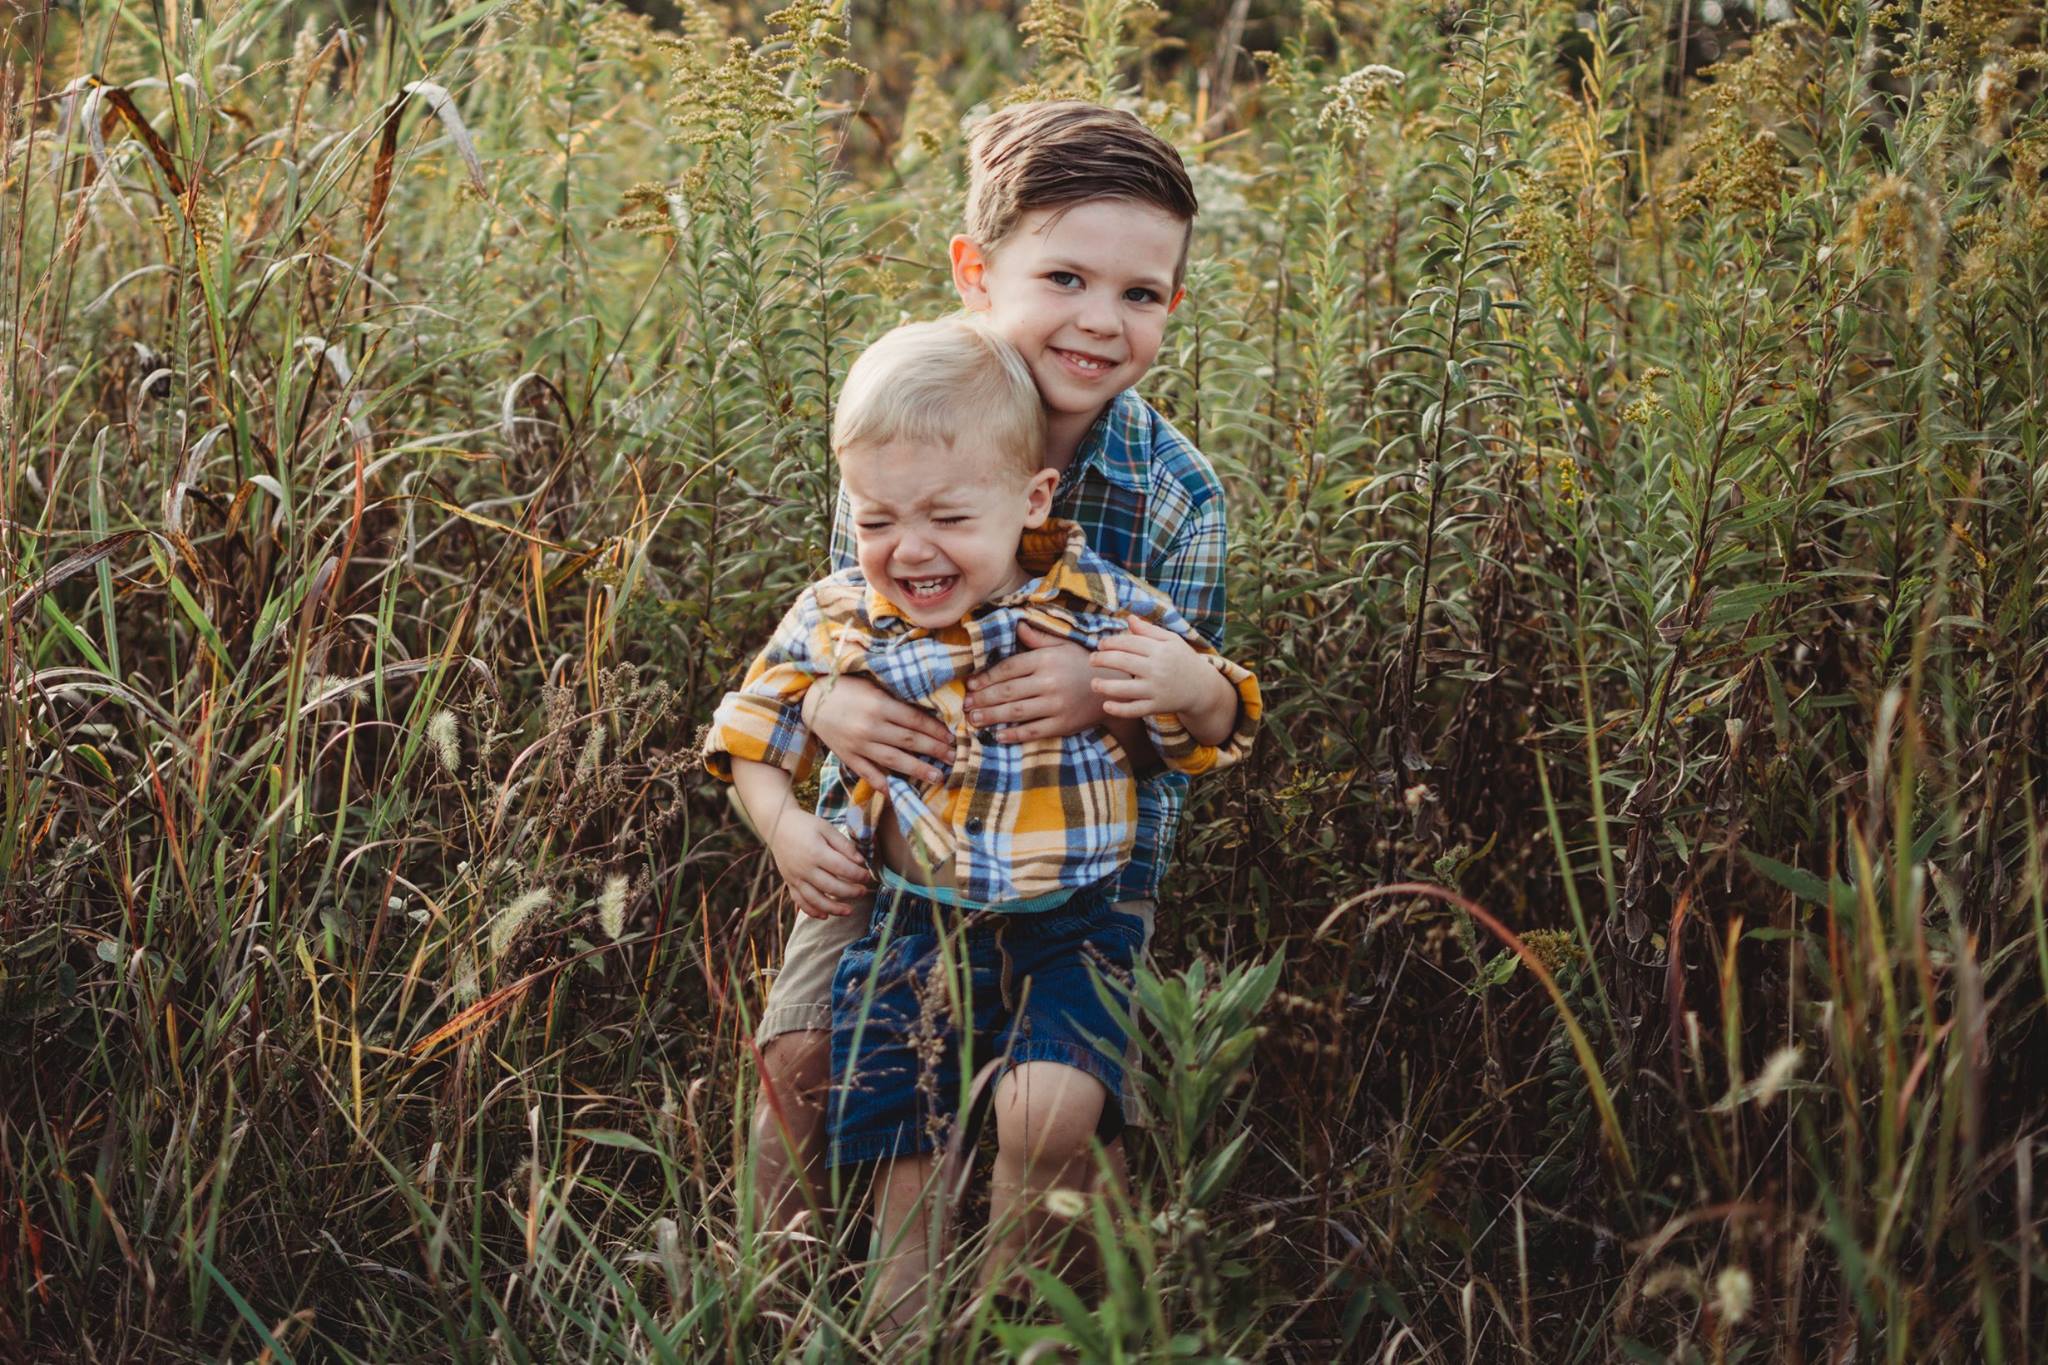  ideas for brothers photos in the outdoors